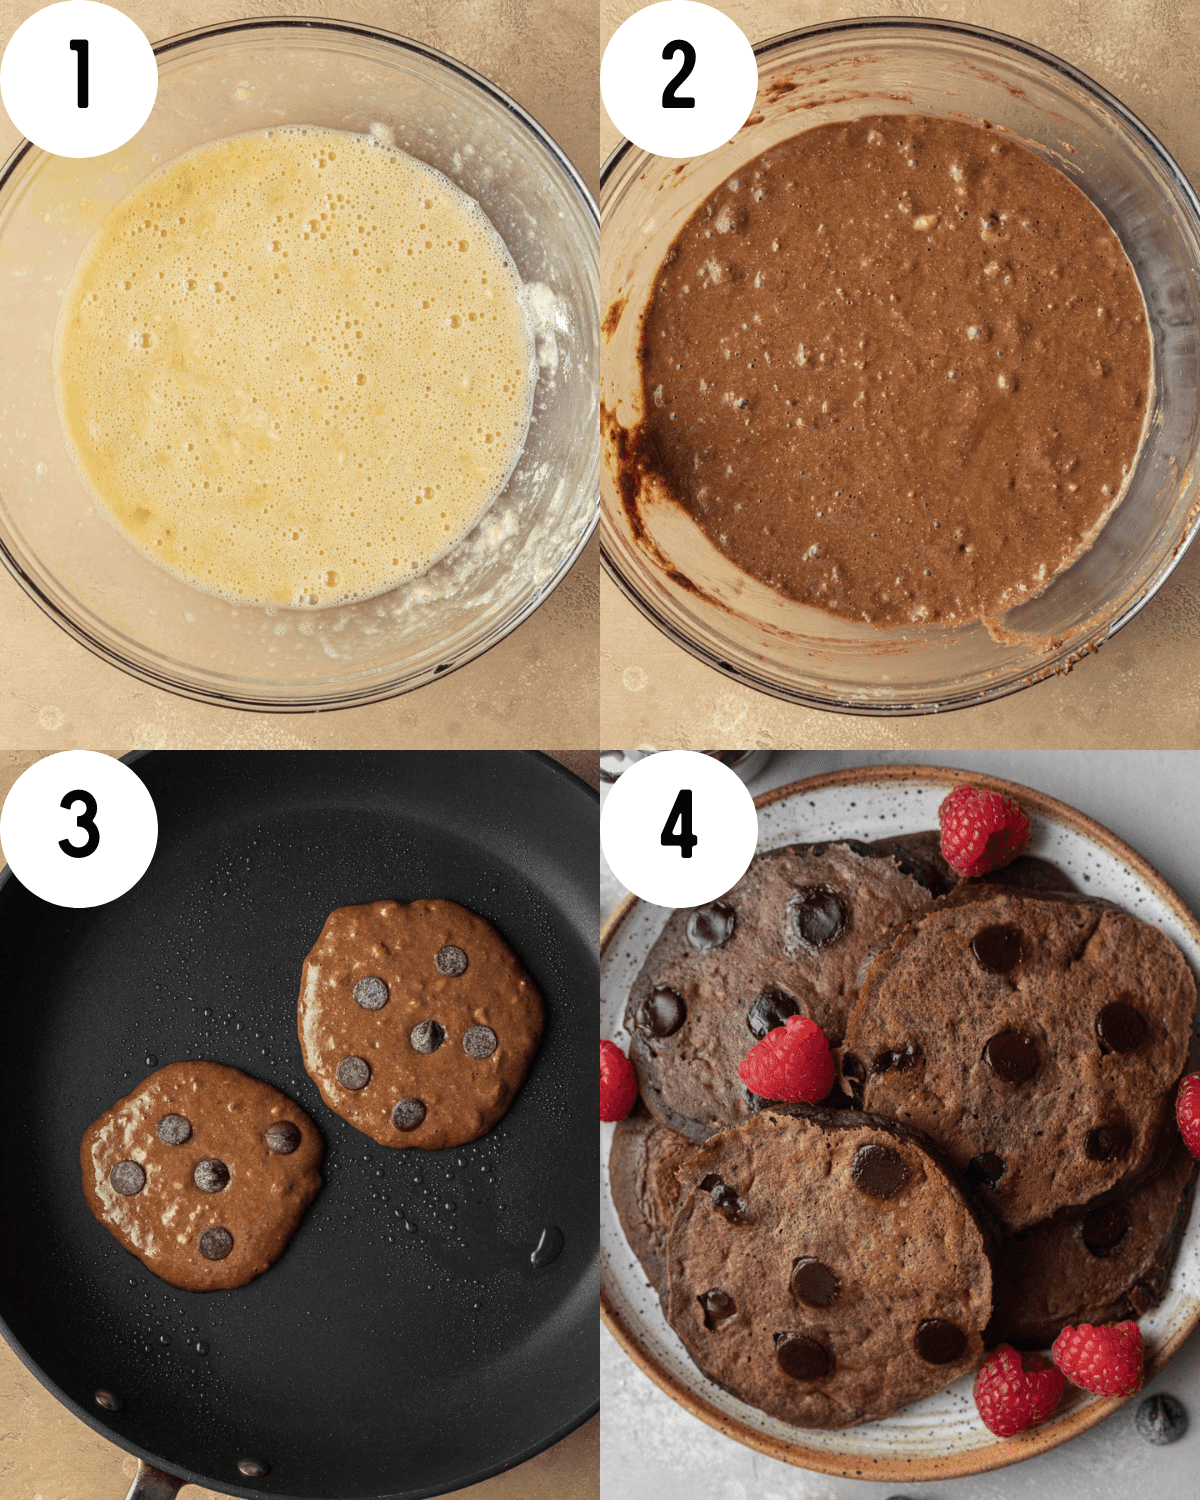 1. bowl with wet ingredients mixed together. 2. batter fully mixed in clear bowl. 3. pancakes on a black non-stick skillet with chocolate chips on top. 4. cooked pancakes on a speckled plate with raspberries 